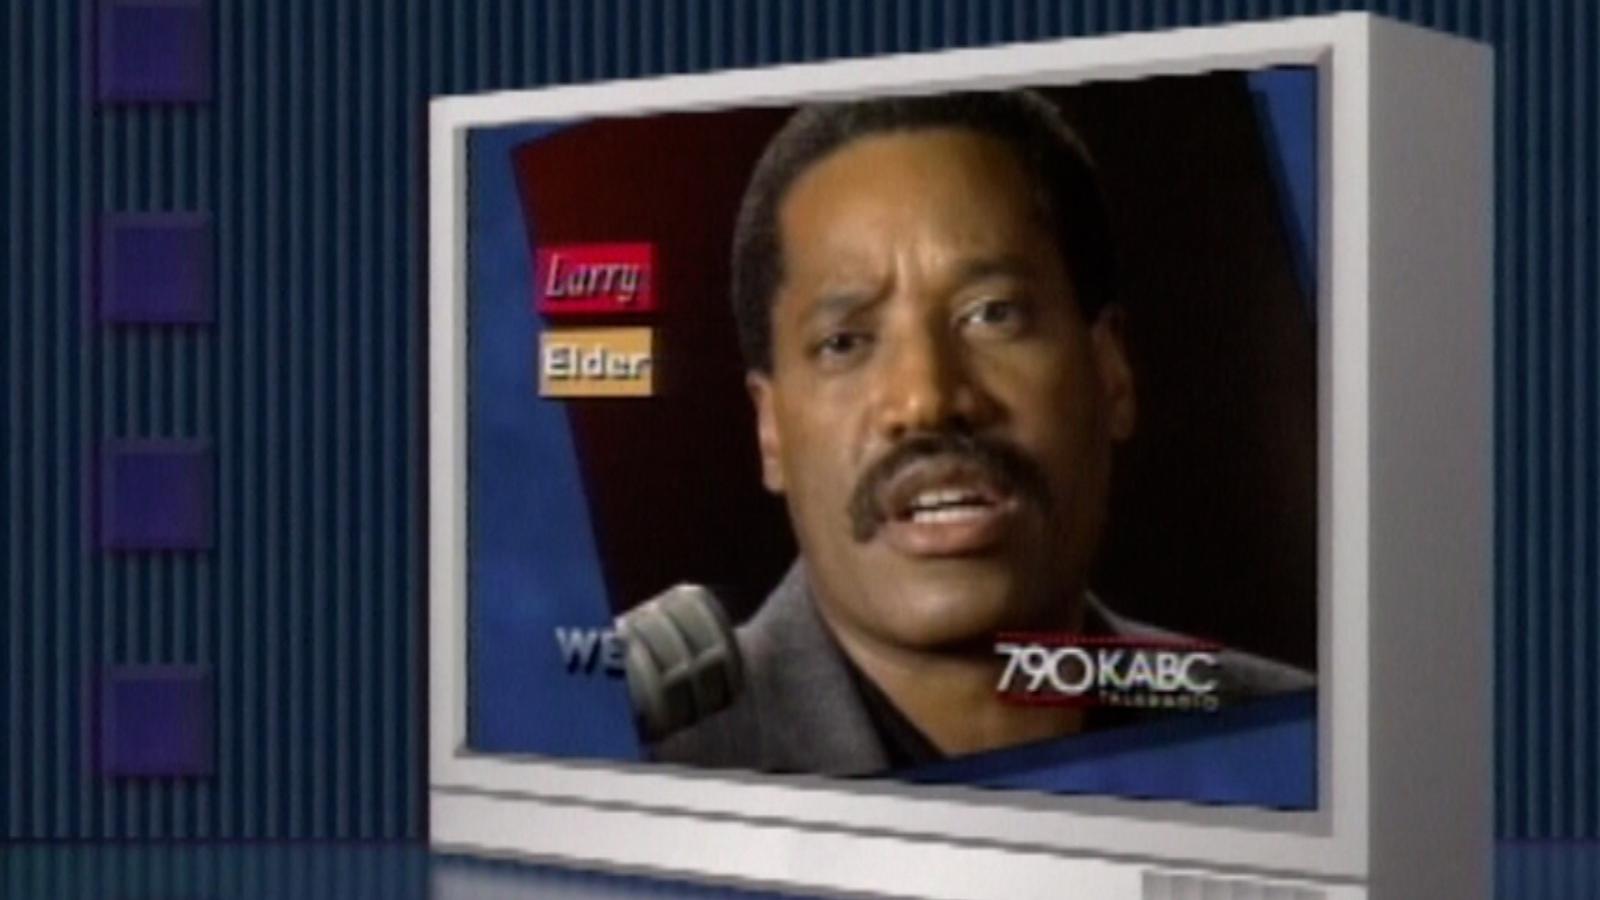 Larry Elder Top California governor candidate has a long history of